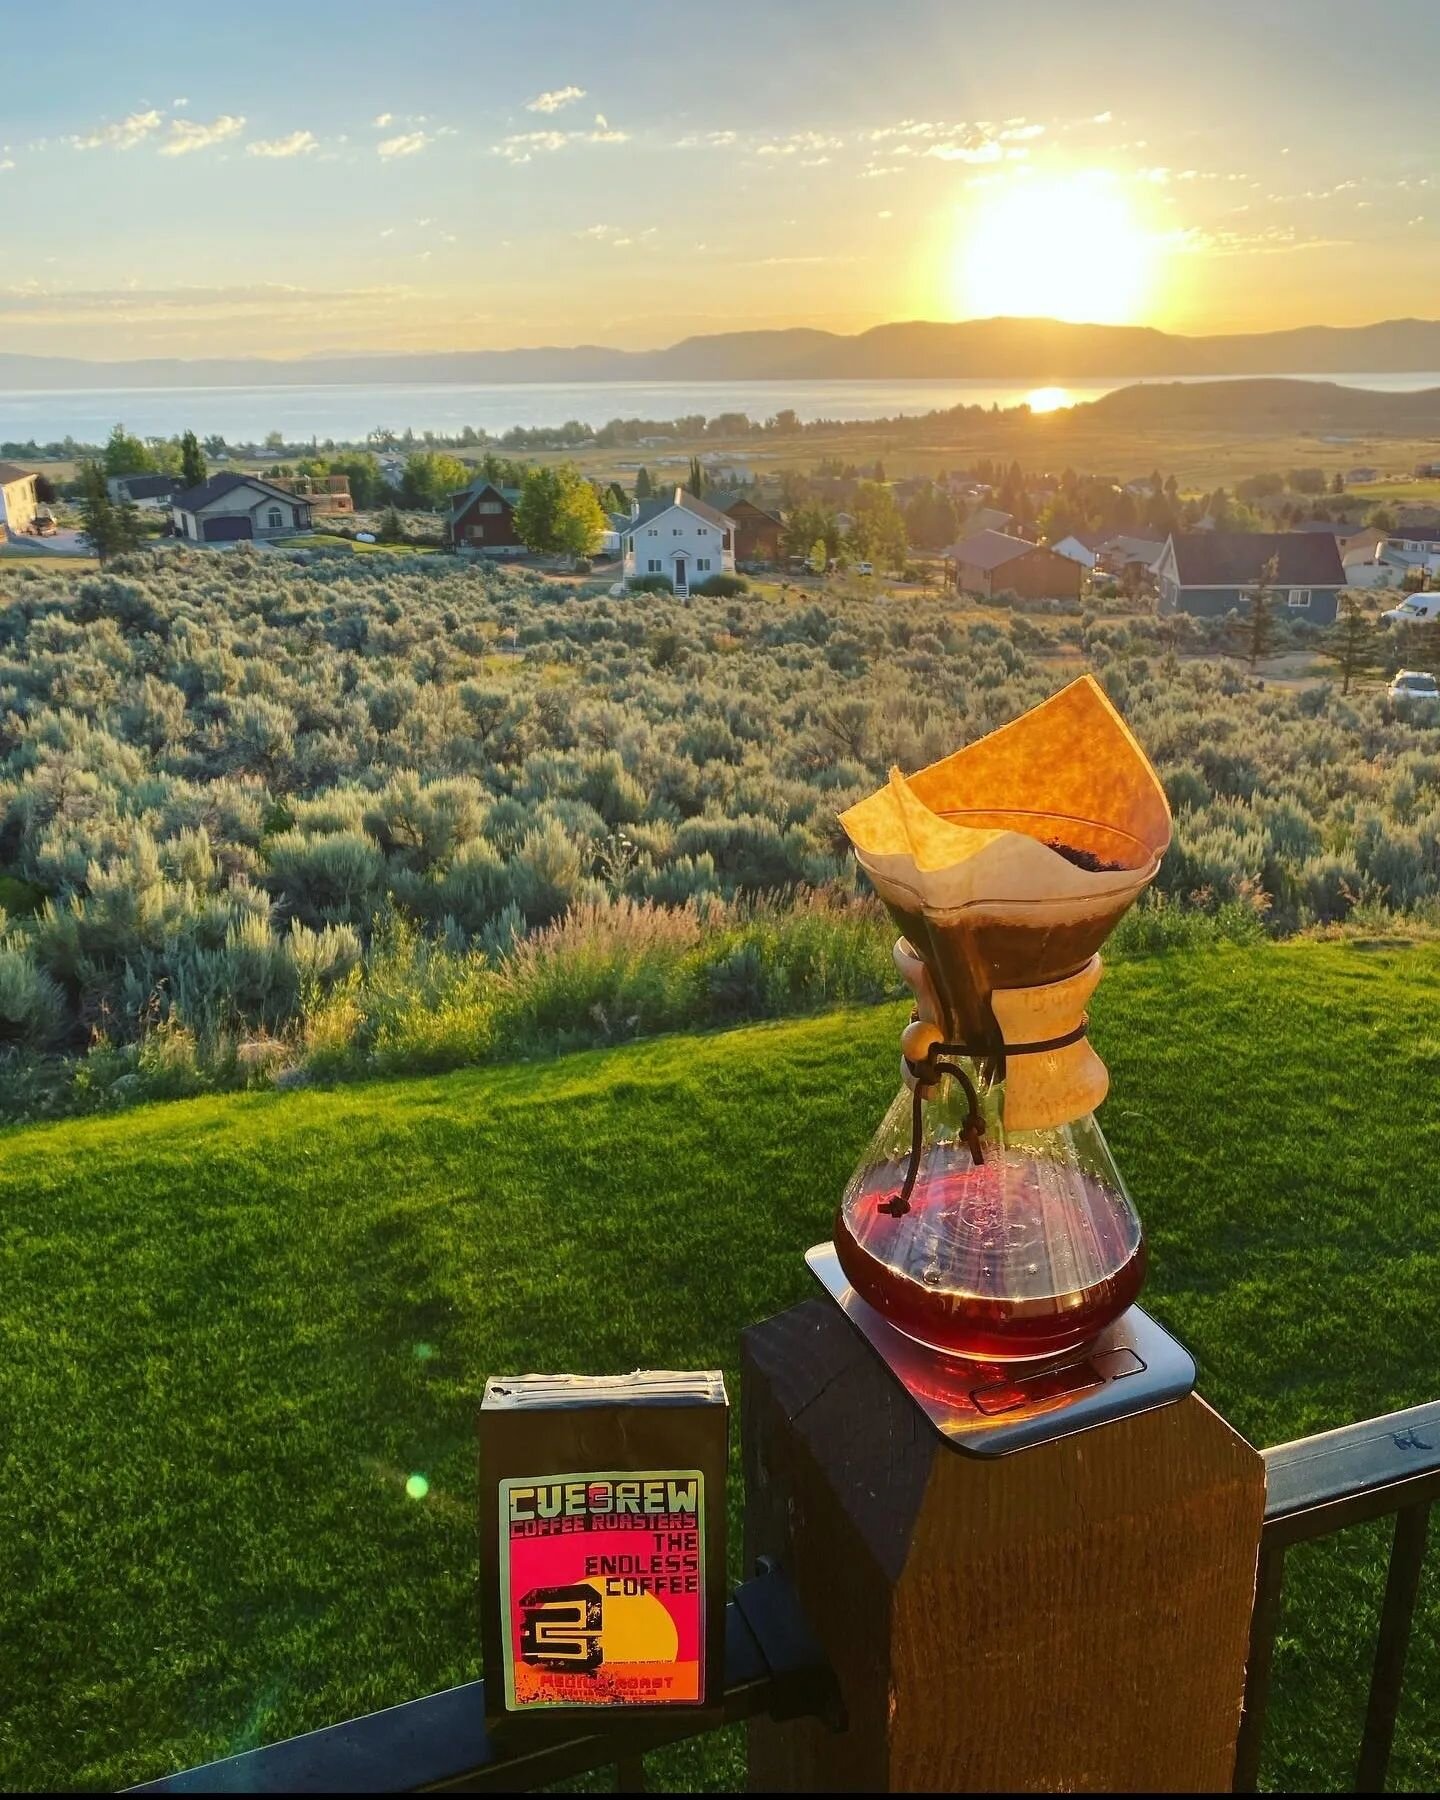 Lovely shot from @the_midwestern_man taking his Endless summer bag to Utah with him. #alwaystravelwithcoffee

#coffee #cuebrew #coffeeroaster #coffeetime #smallbatchcoffee #shopsmall #smallbusiness #roswellga #summercoffee #icedcoffee #coldbrew #roas